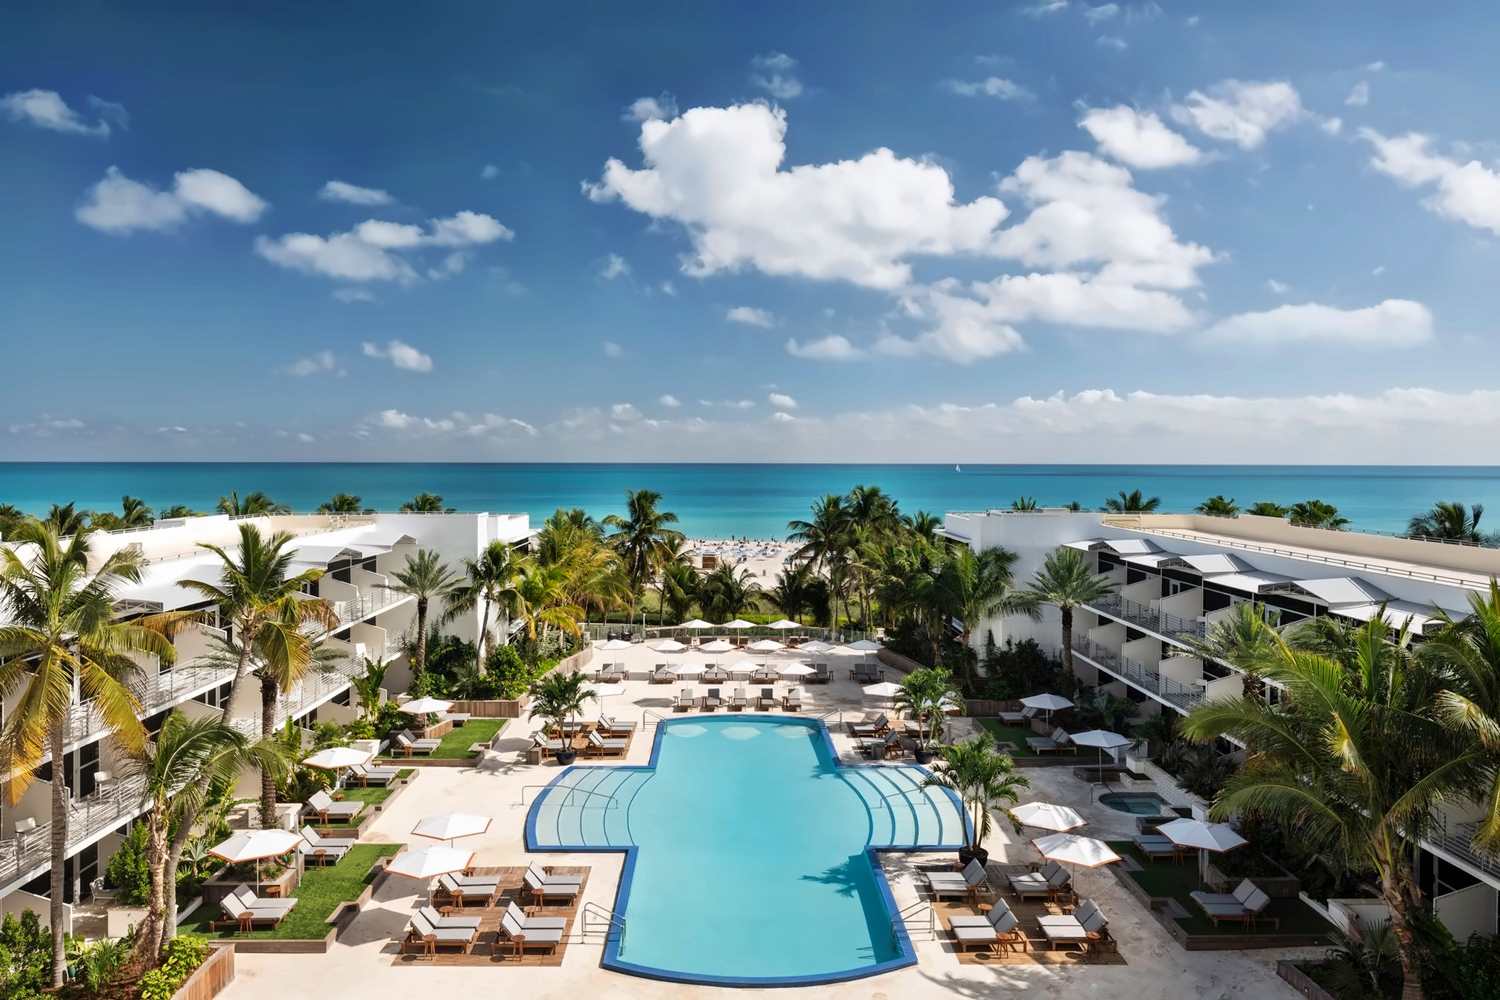 The Best Beach Resorts in Miami for a Memorable Stay